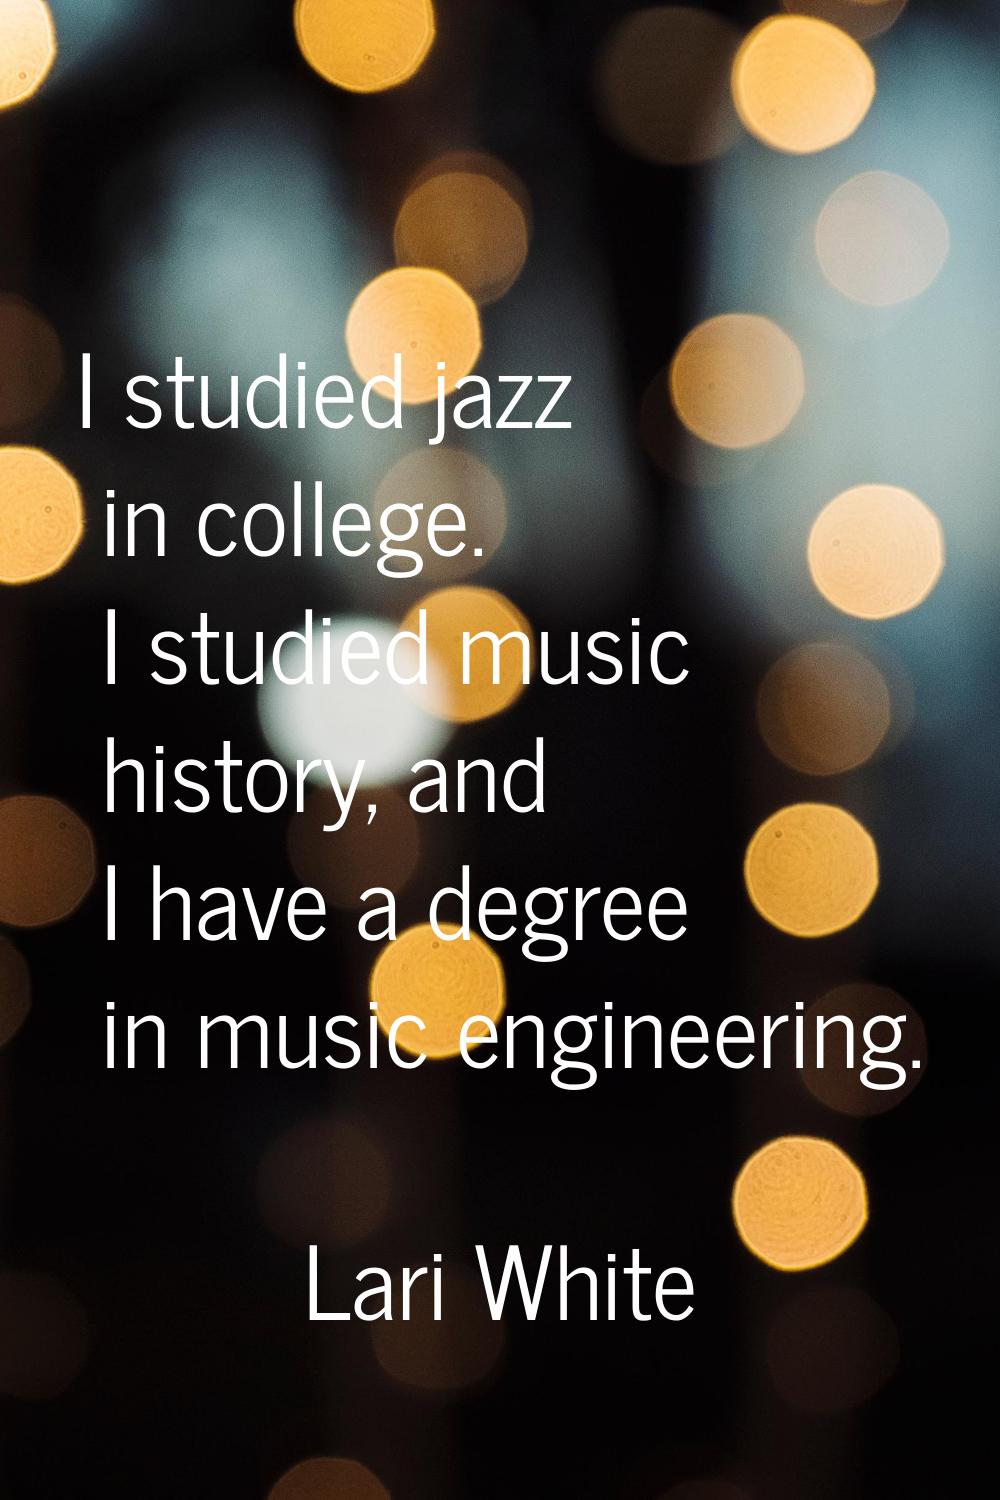 I studied jazz in college. I studied music history, and I have a degree in music engineering.